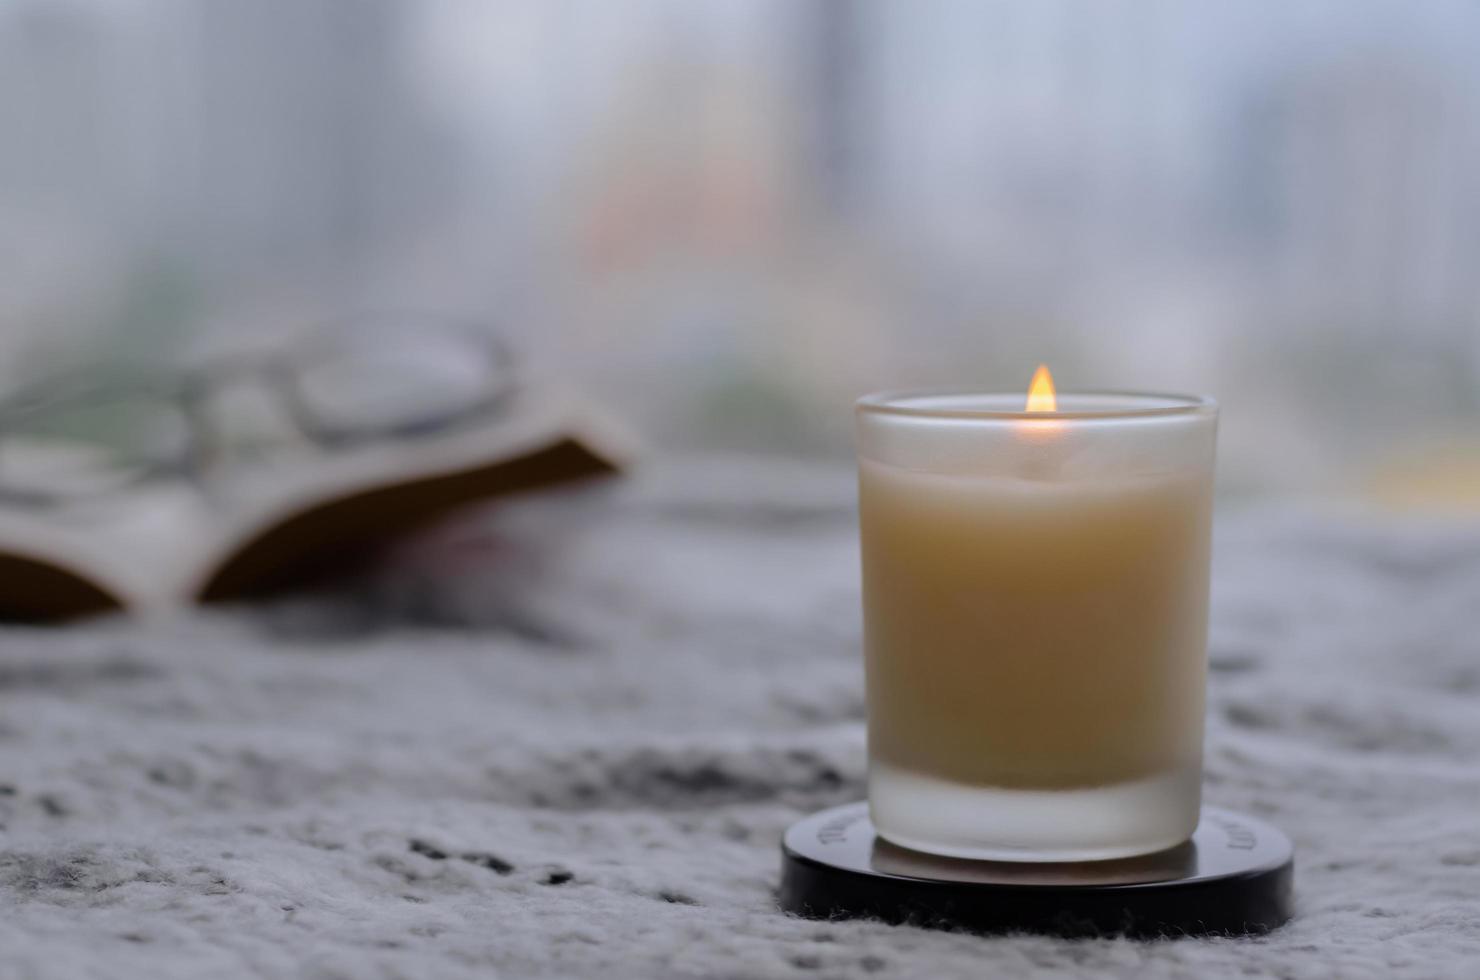 Flame burning at blurred aroma candle for relaxing when reading book at home in winter season. photo